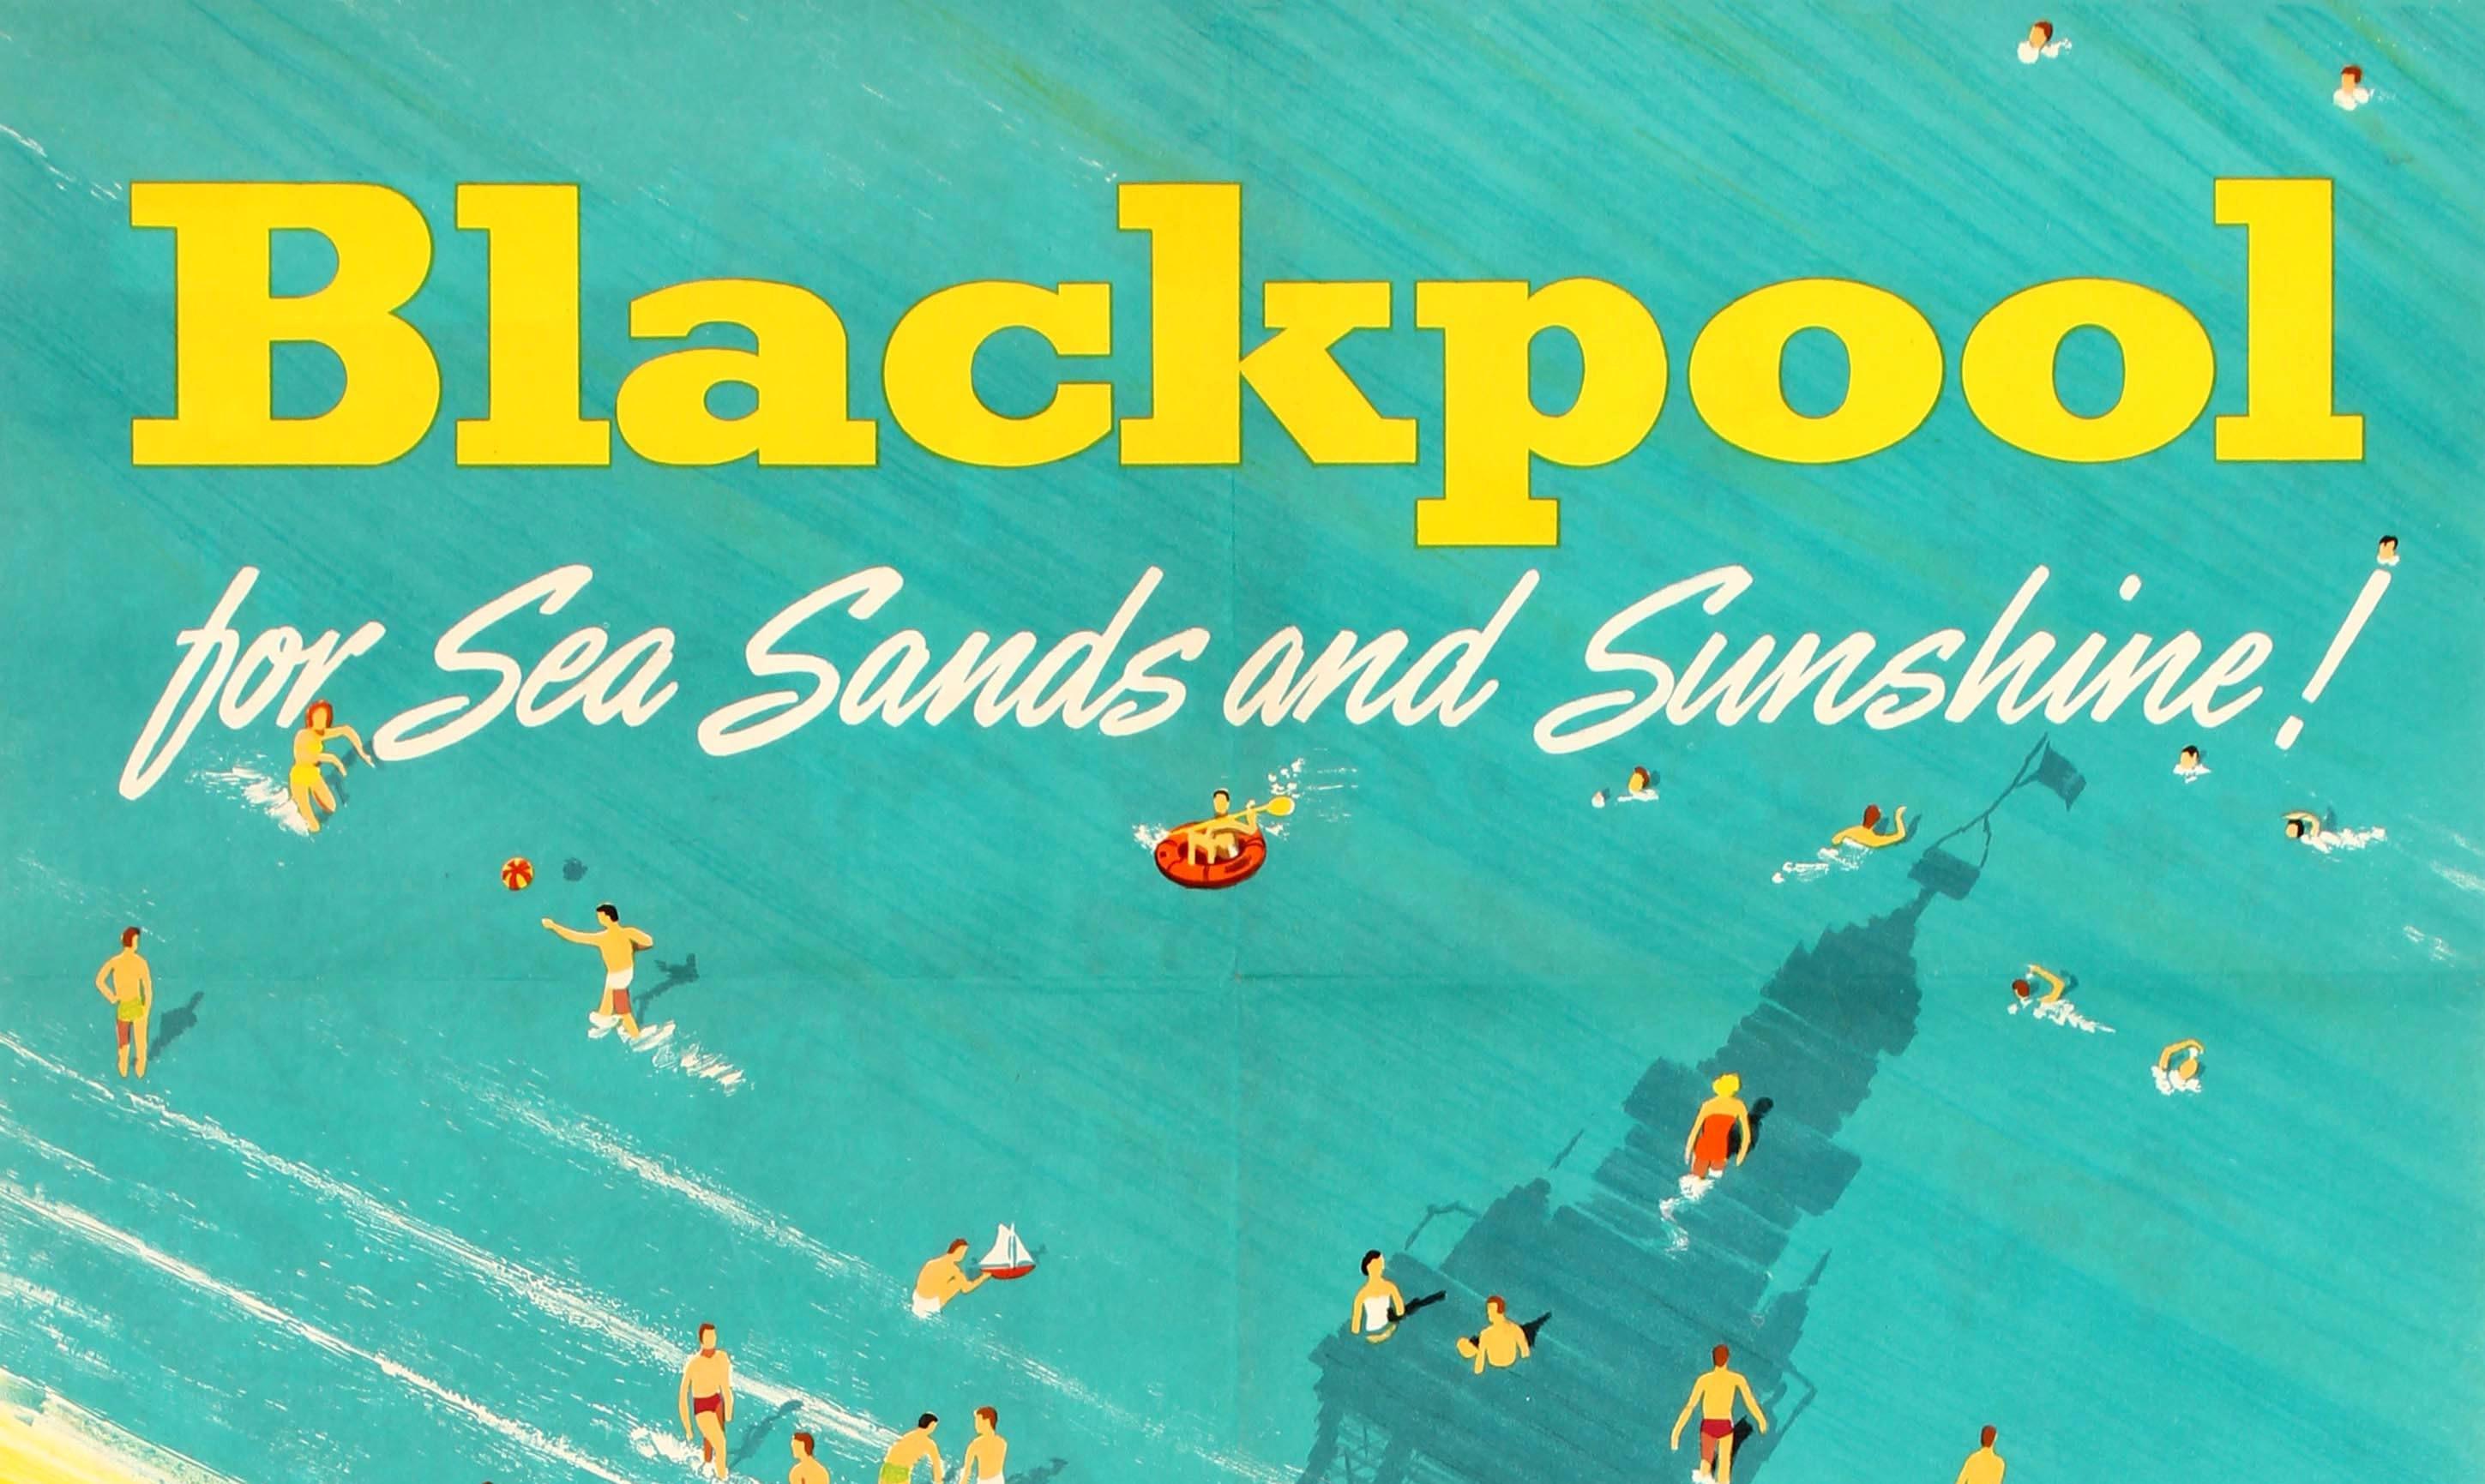 Original vintage travel poster promoting Blackpool as a holiday destination, published by British Railways. Bright and sunny aerial view over a beach in Blackpool with couples and families walking, children building a sandcastle, people playing